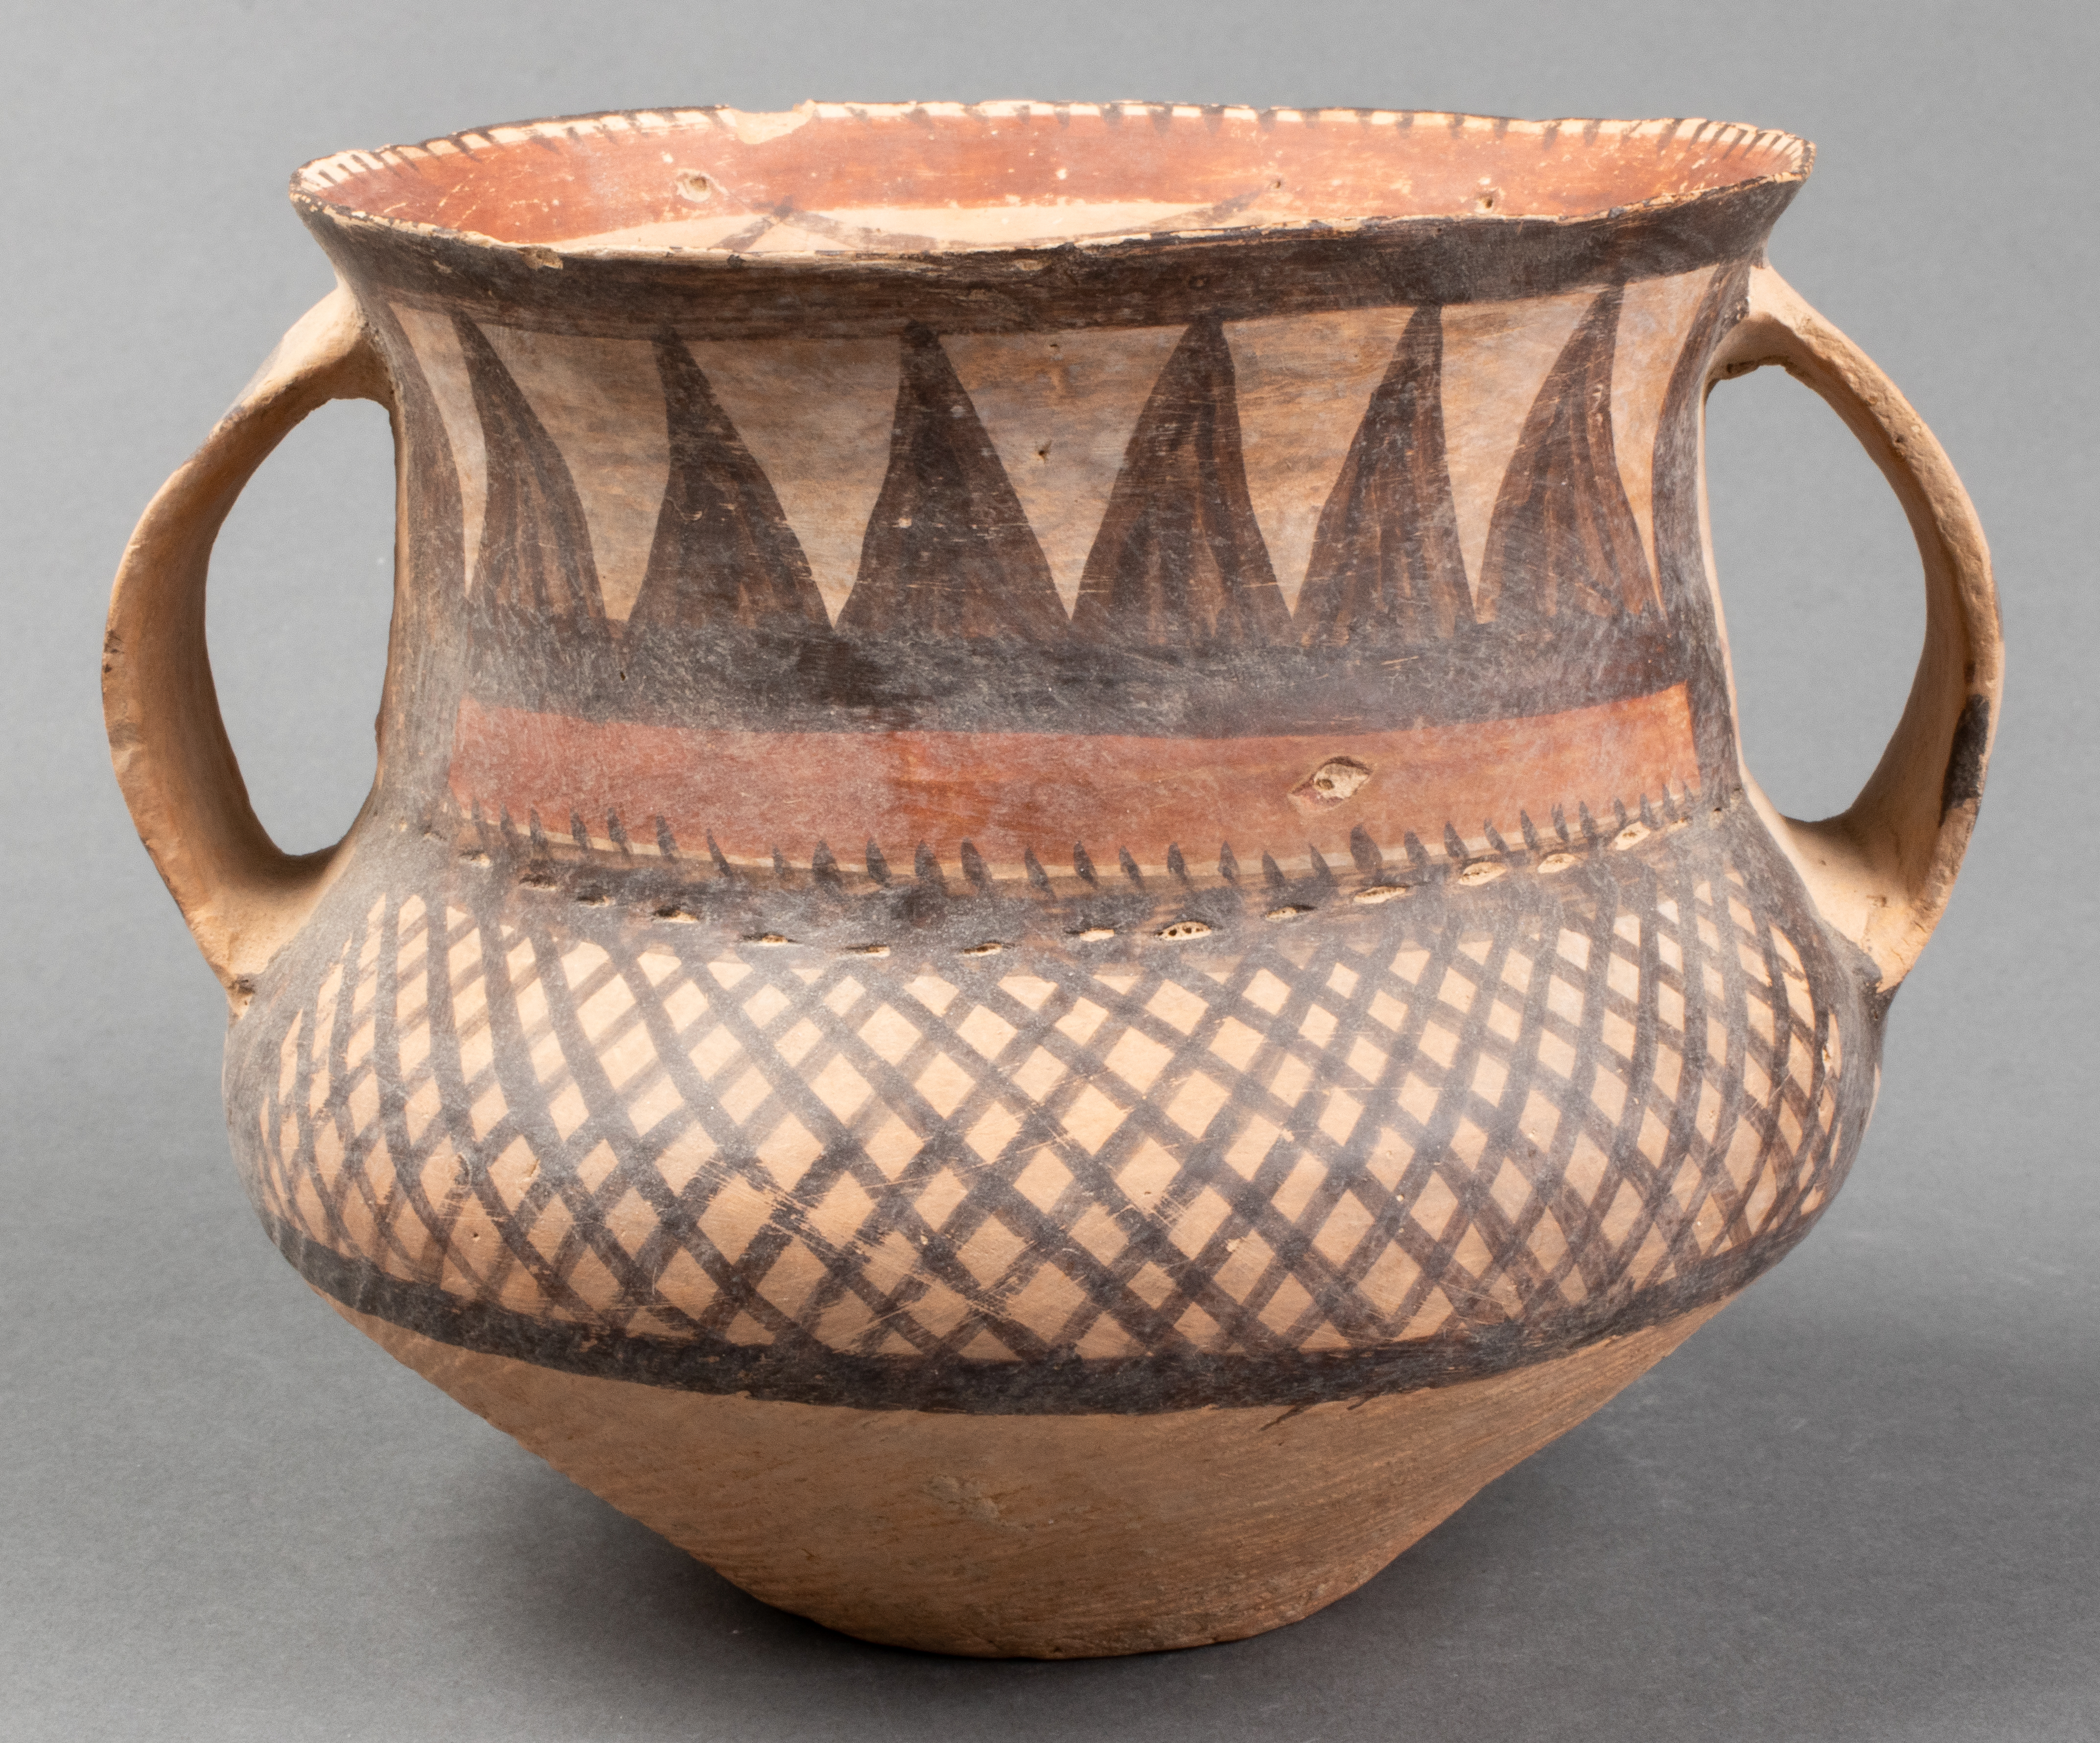 CHINESE NEOLITHIC PERIOD POTTERY 3c40e6